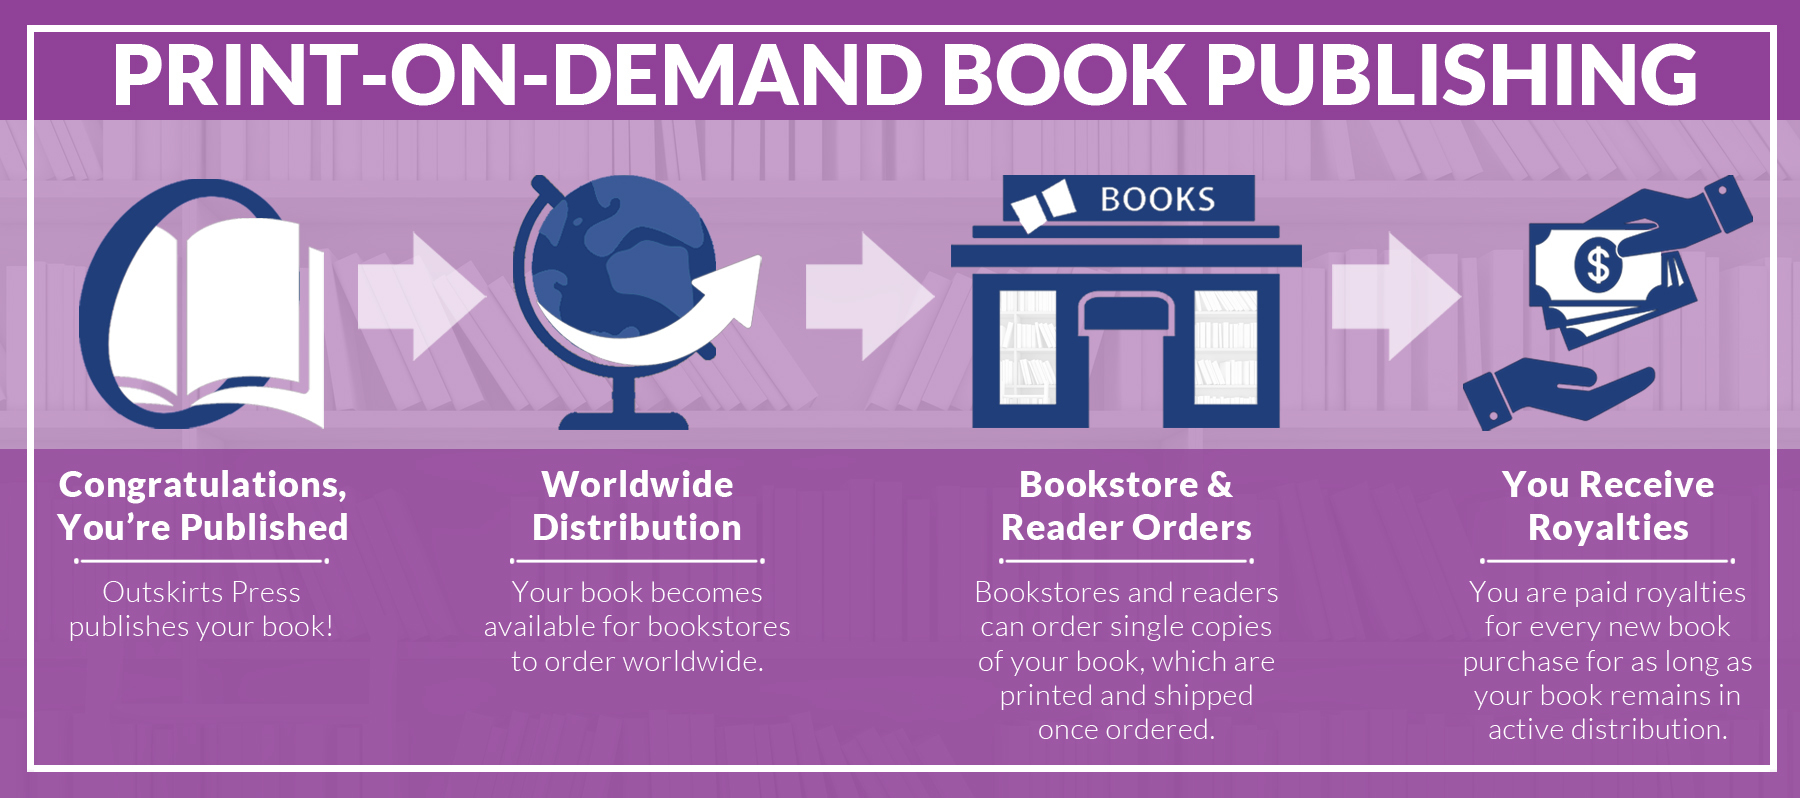 PRINT-ON-DEMAND BOOK PUBLISHING WITH OUTKSKIRTS PRESS: Once Outskirts Press publishes your book, it becomes available for bookstores to order worldwide. Online & offline bookstores can order copies of your book, which are printed and shipped once ordered. You, as the author, are paid royalties for every new book purchase for as long as your book remains in active distribution.  Our print-on-demand (POD) fulfillment system means your book is never out of stock and you don’t have the risk or worry associated with storing inventory-—each book is printed when it is ordered by the bookstore and then shipped directly to the retailer or the reader. Better for you, better for your book, better for the planet—everyone wins!